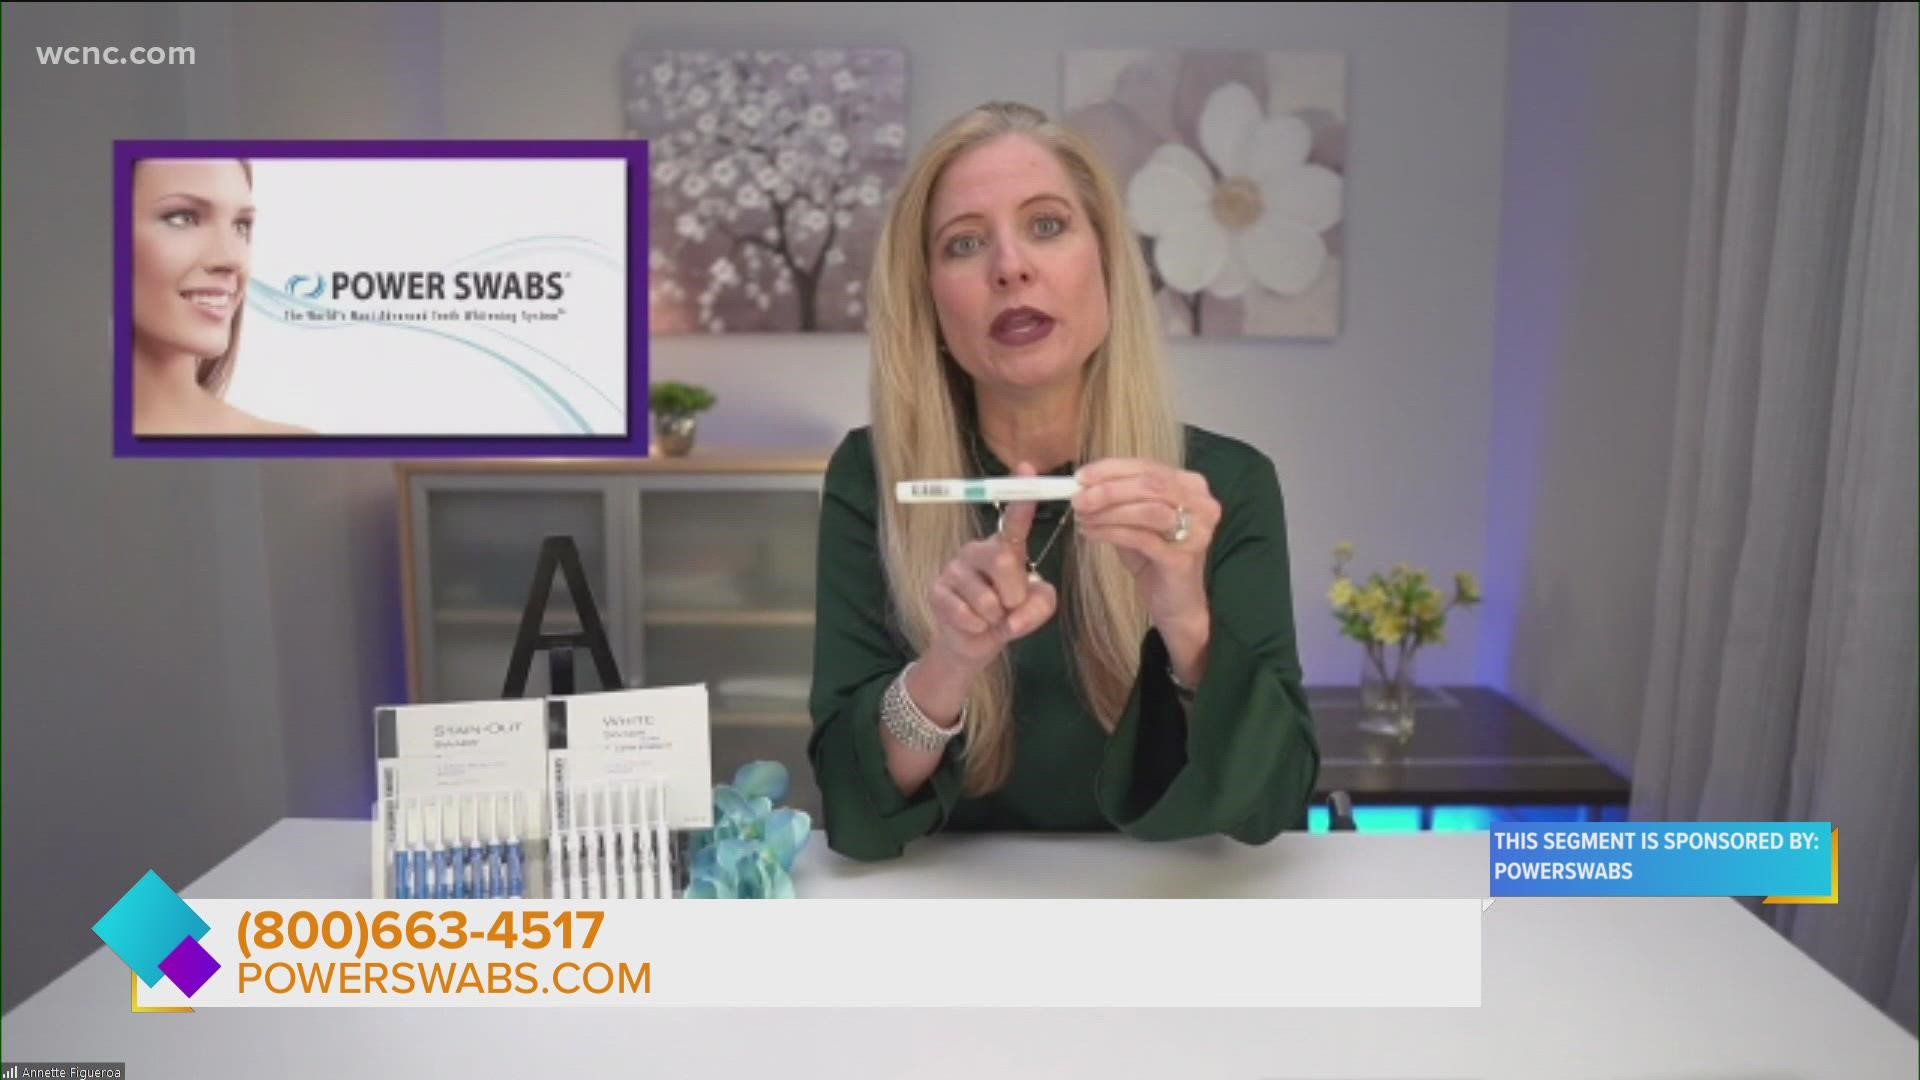 Power Swabs has a New Year's special going on right now